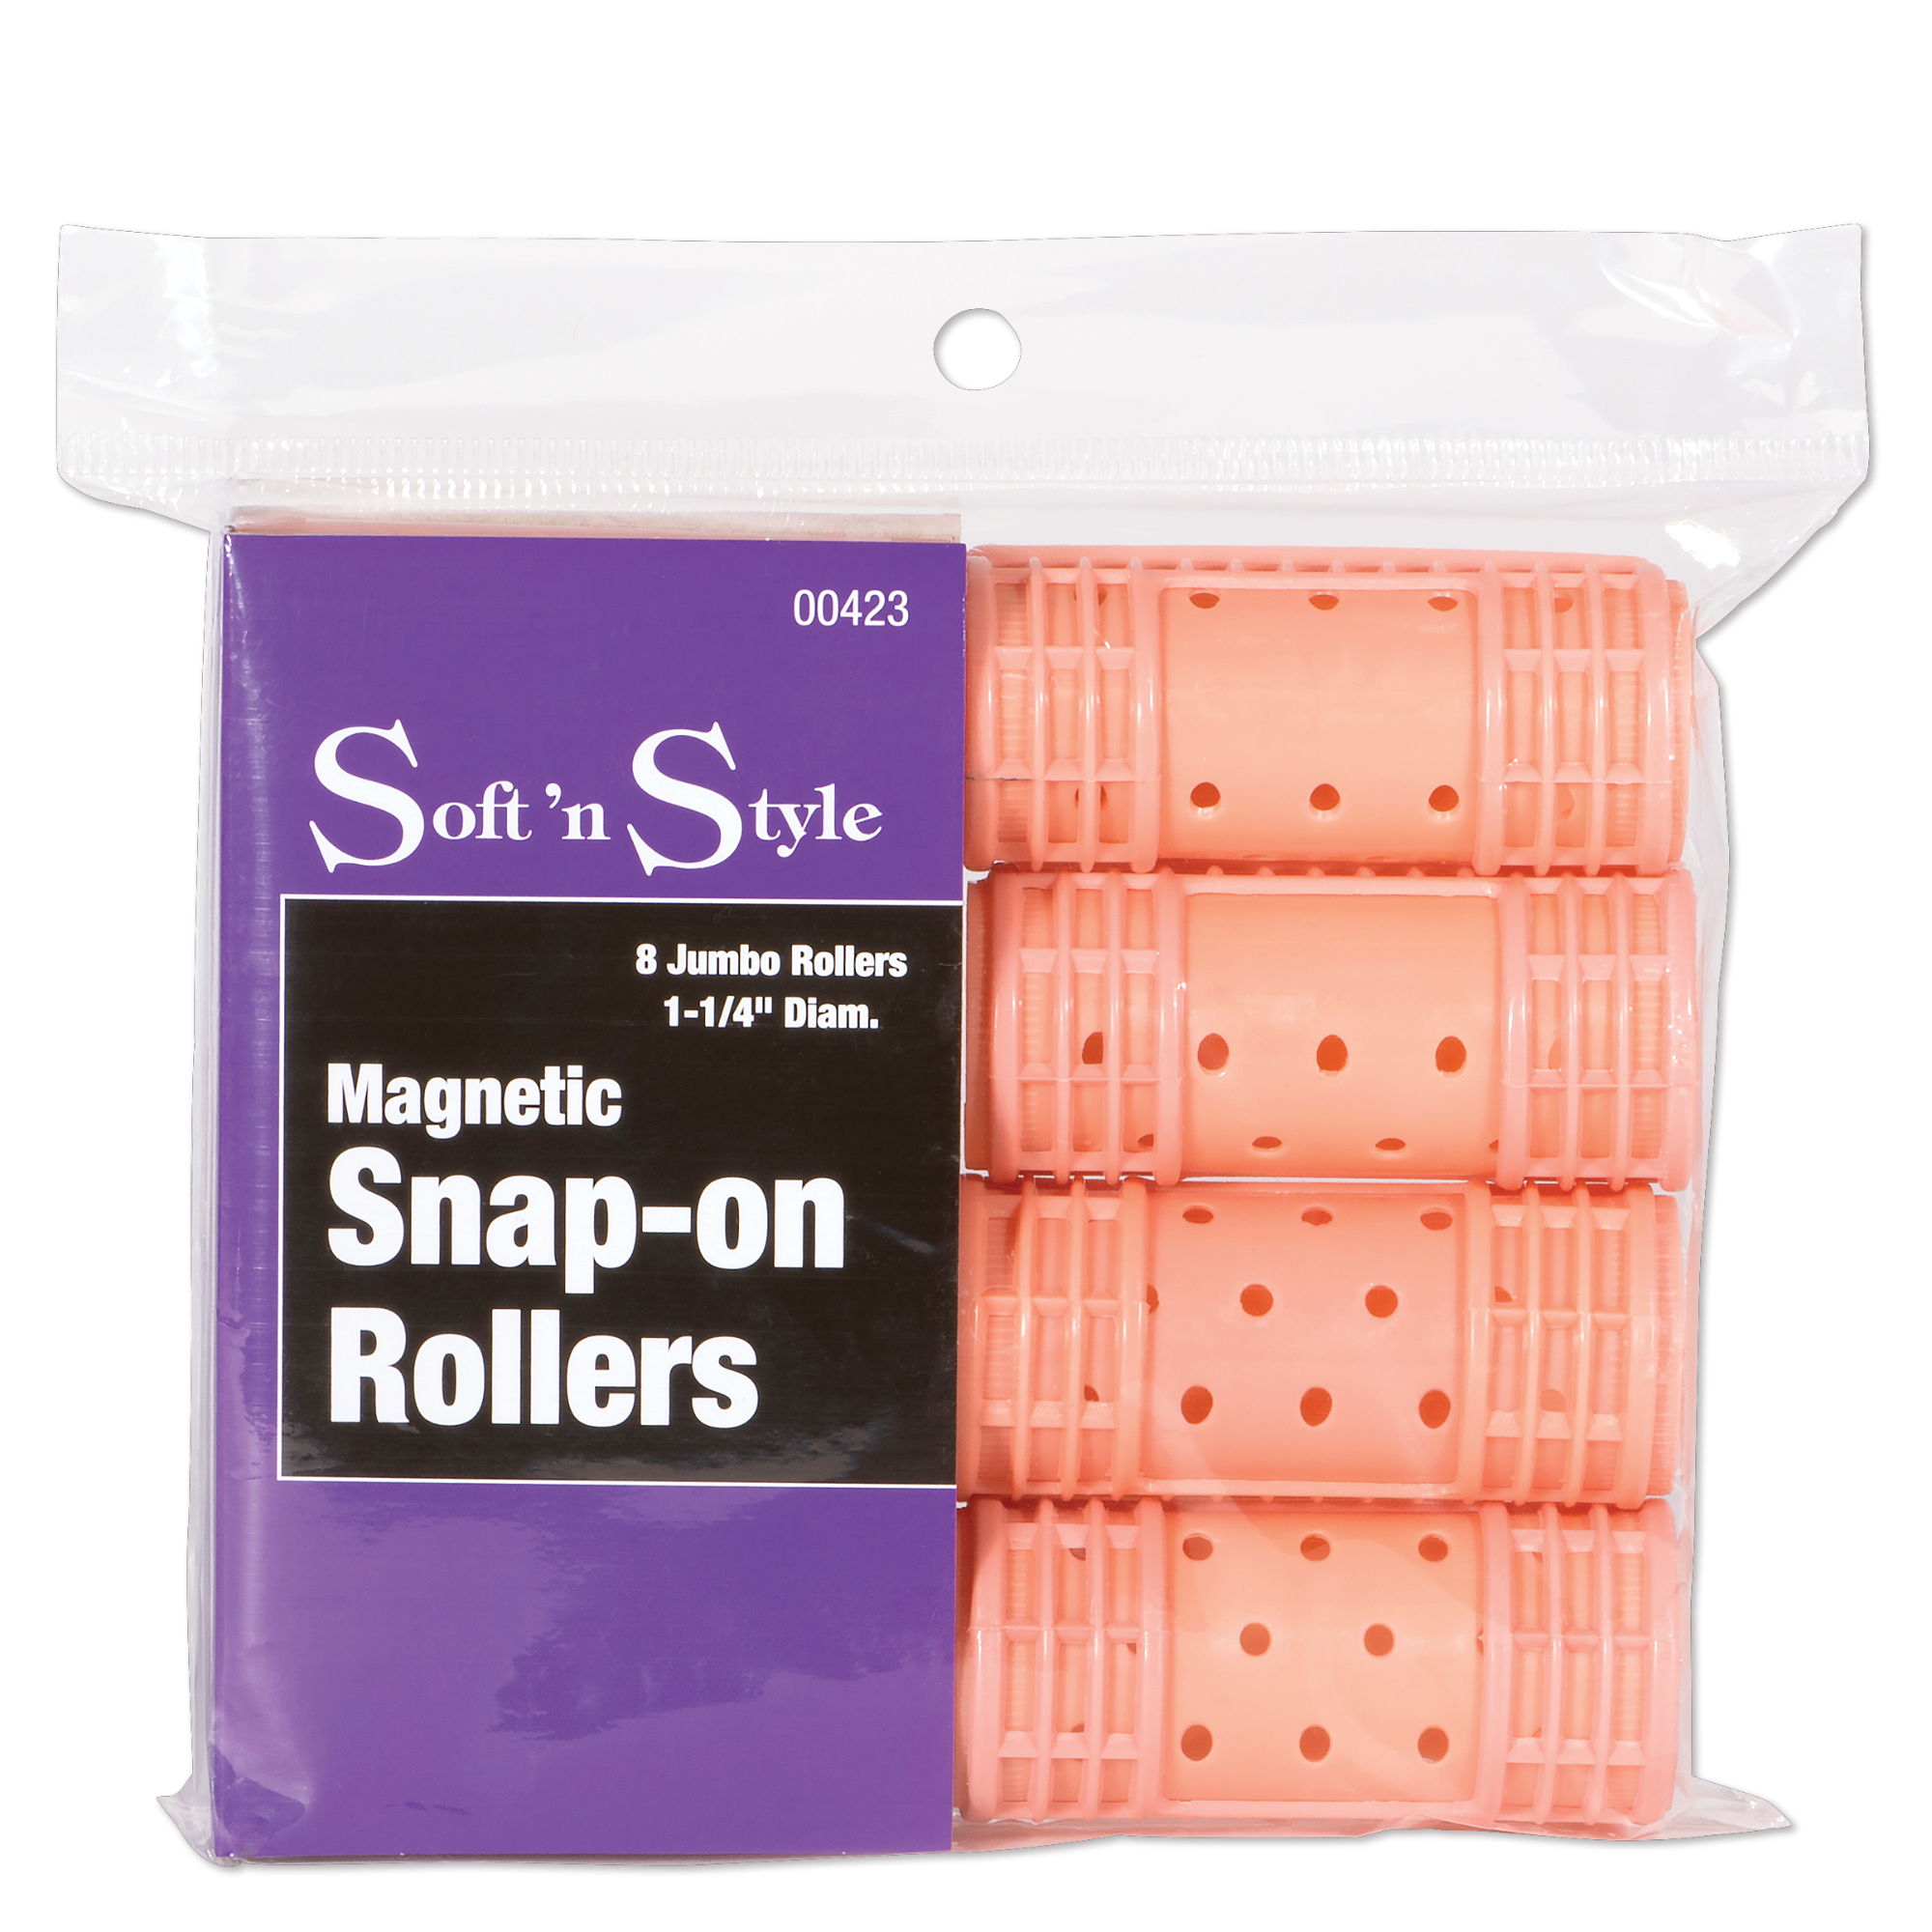 Magnetic Snap-on Rollers, Jumbo - 1-1/4"